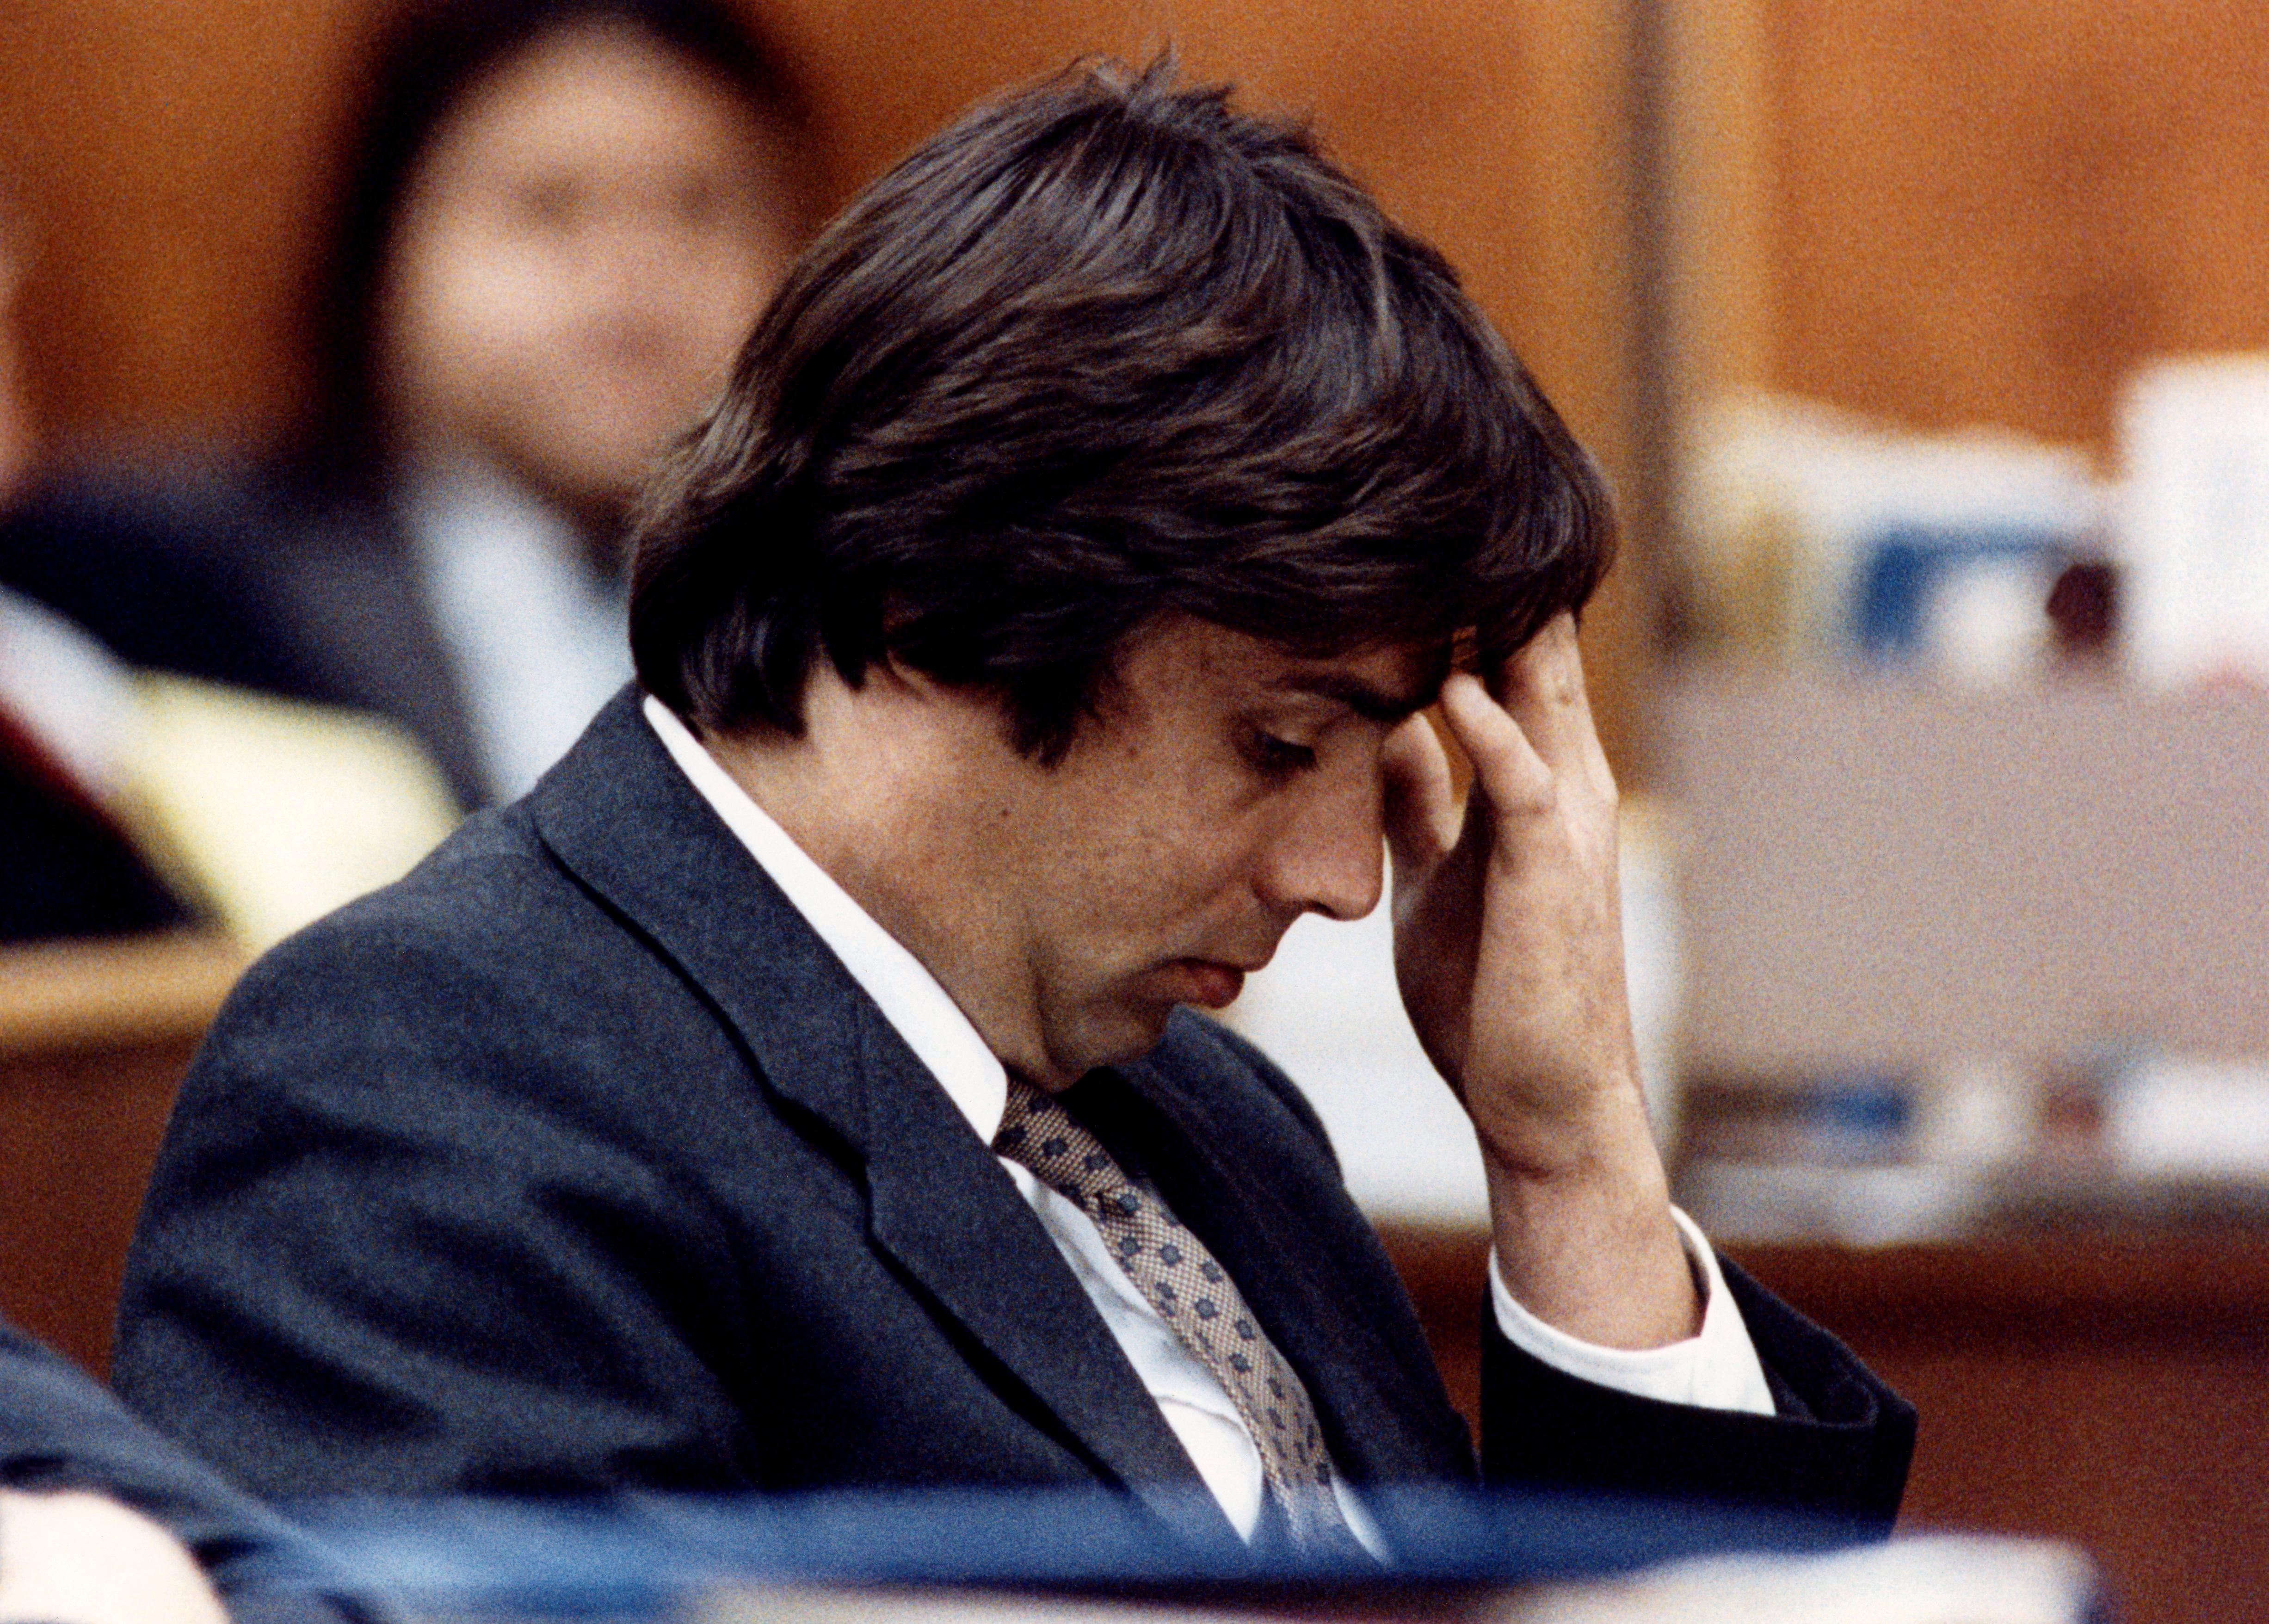 Christian Brando on trial for the murder of Dag Drollet, circa 1990 | Source: Getty Images